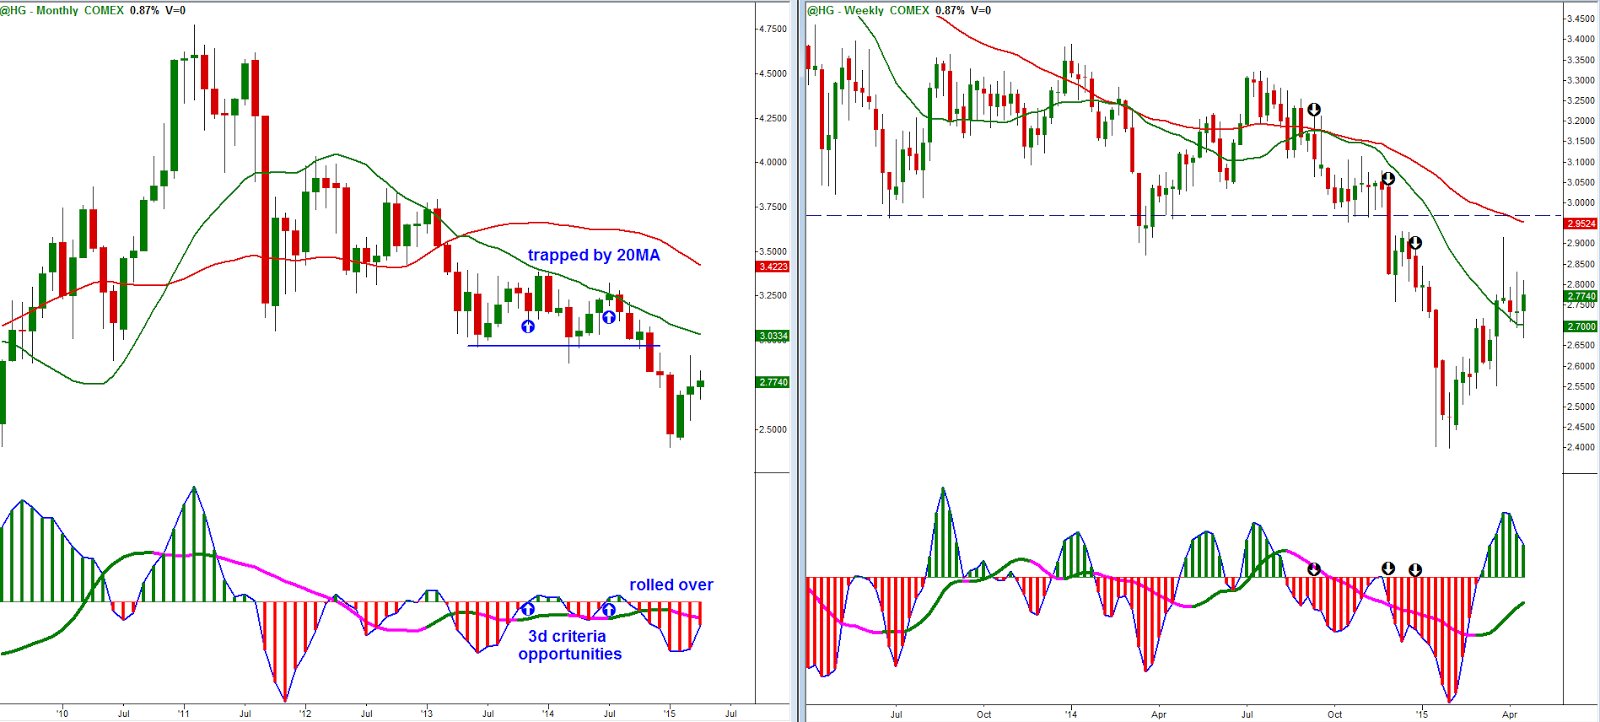 Copper Monthly and Weekly 2014